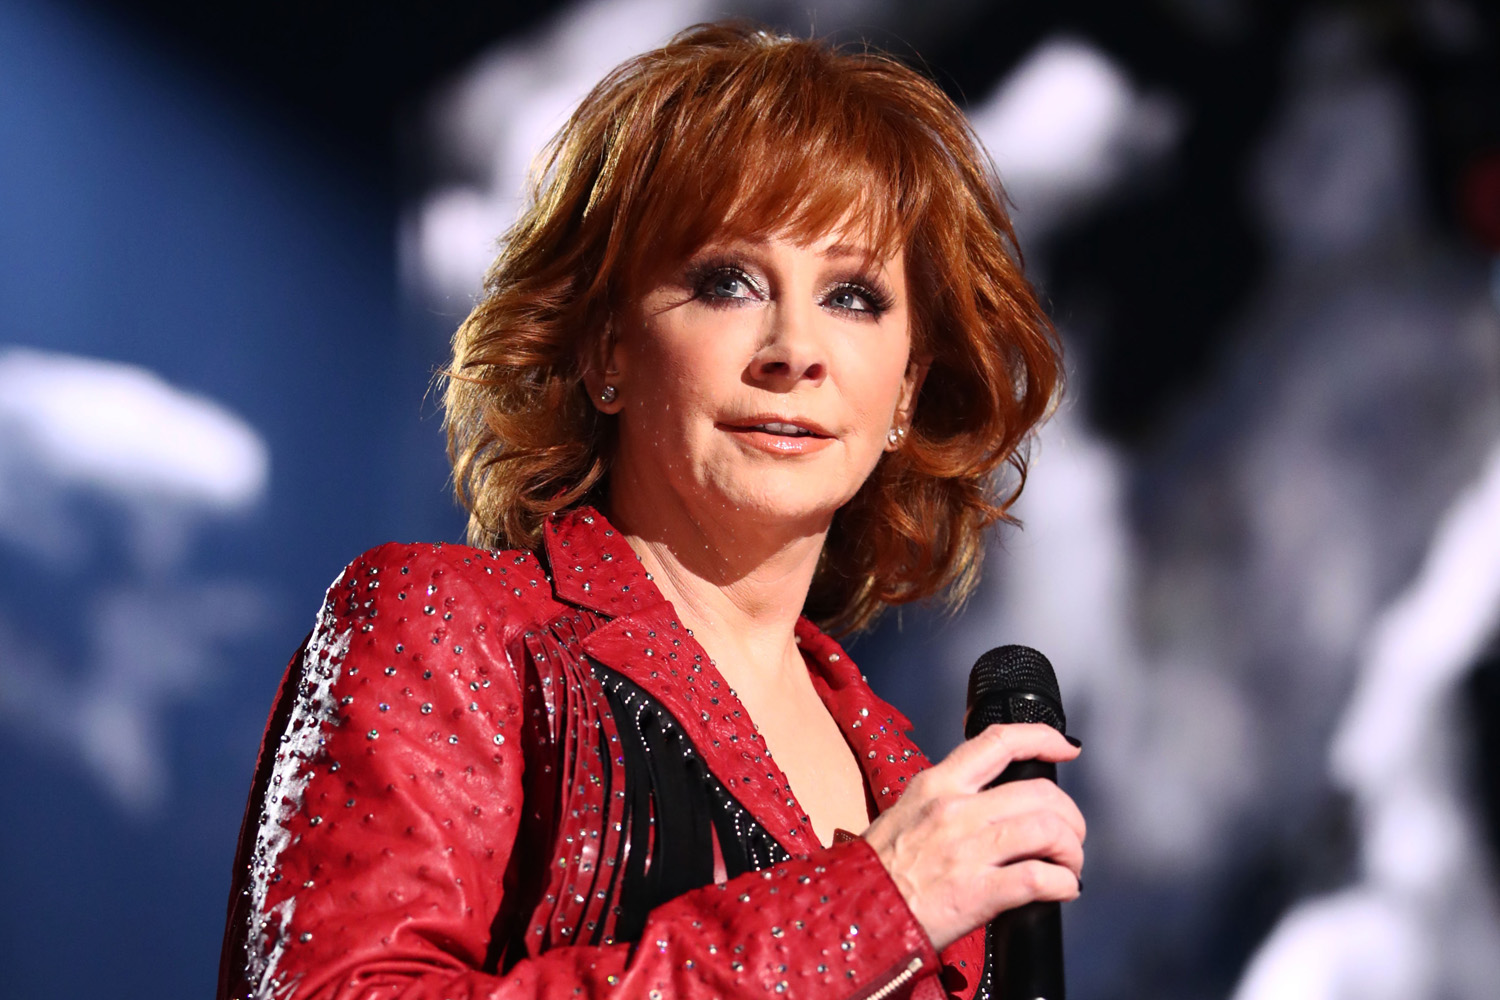 Who is Reba McEntire dating? | The Sun